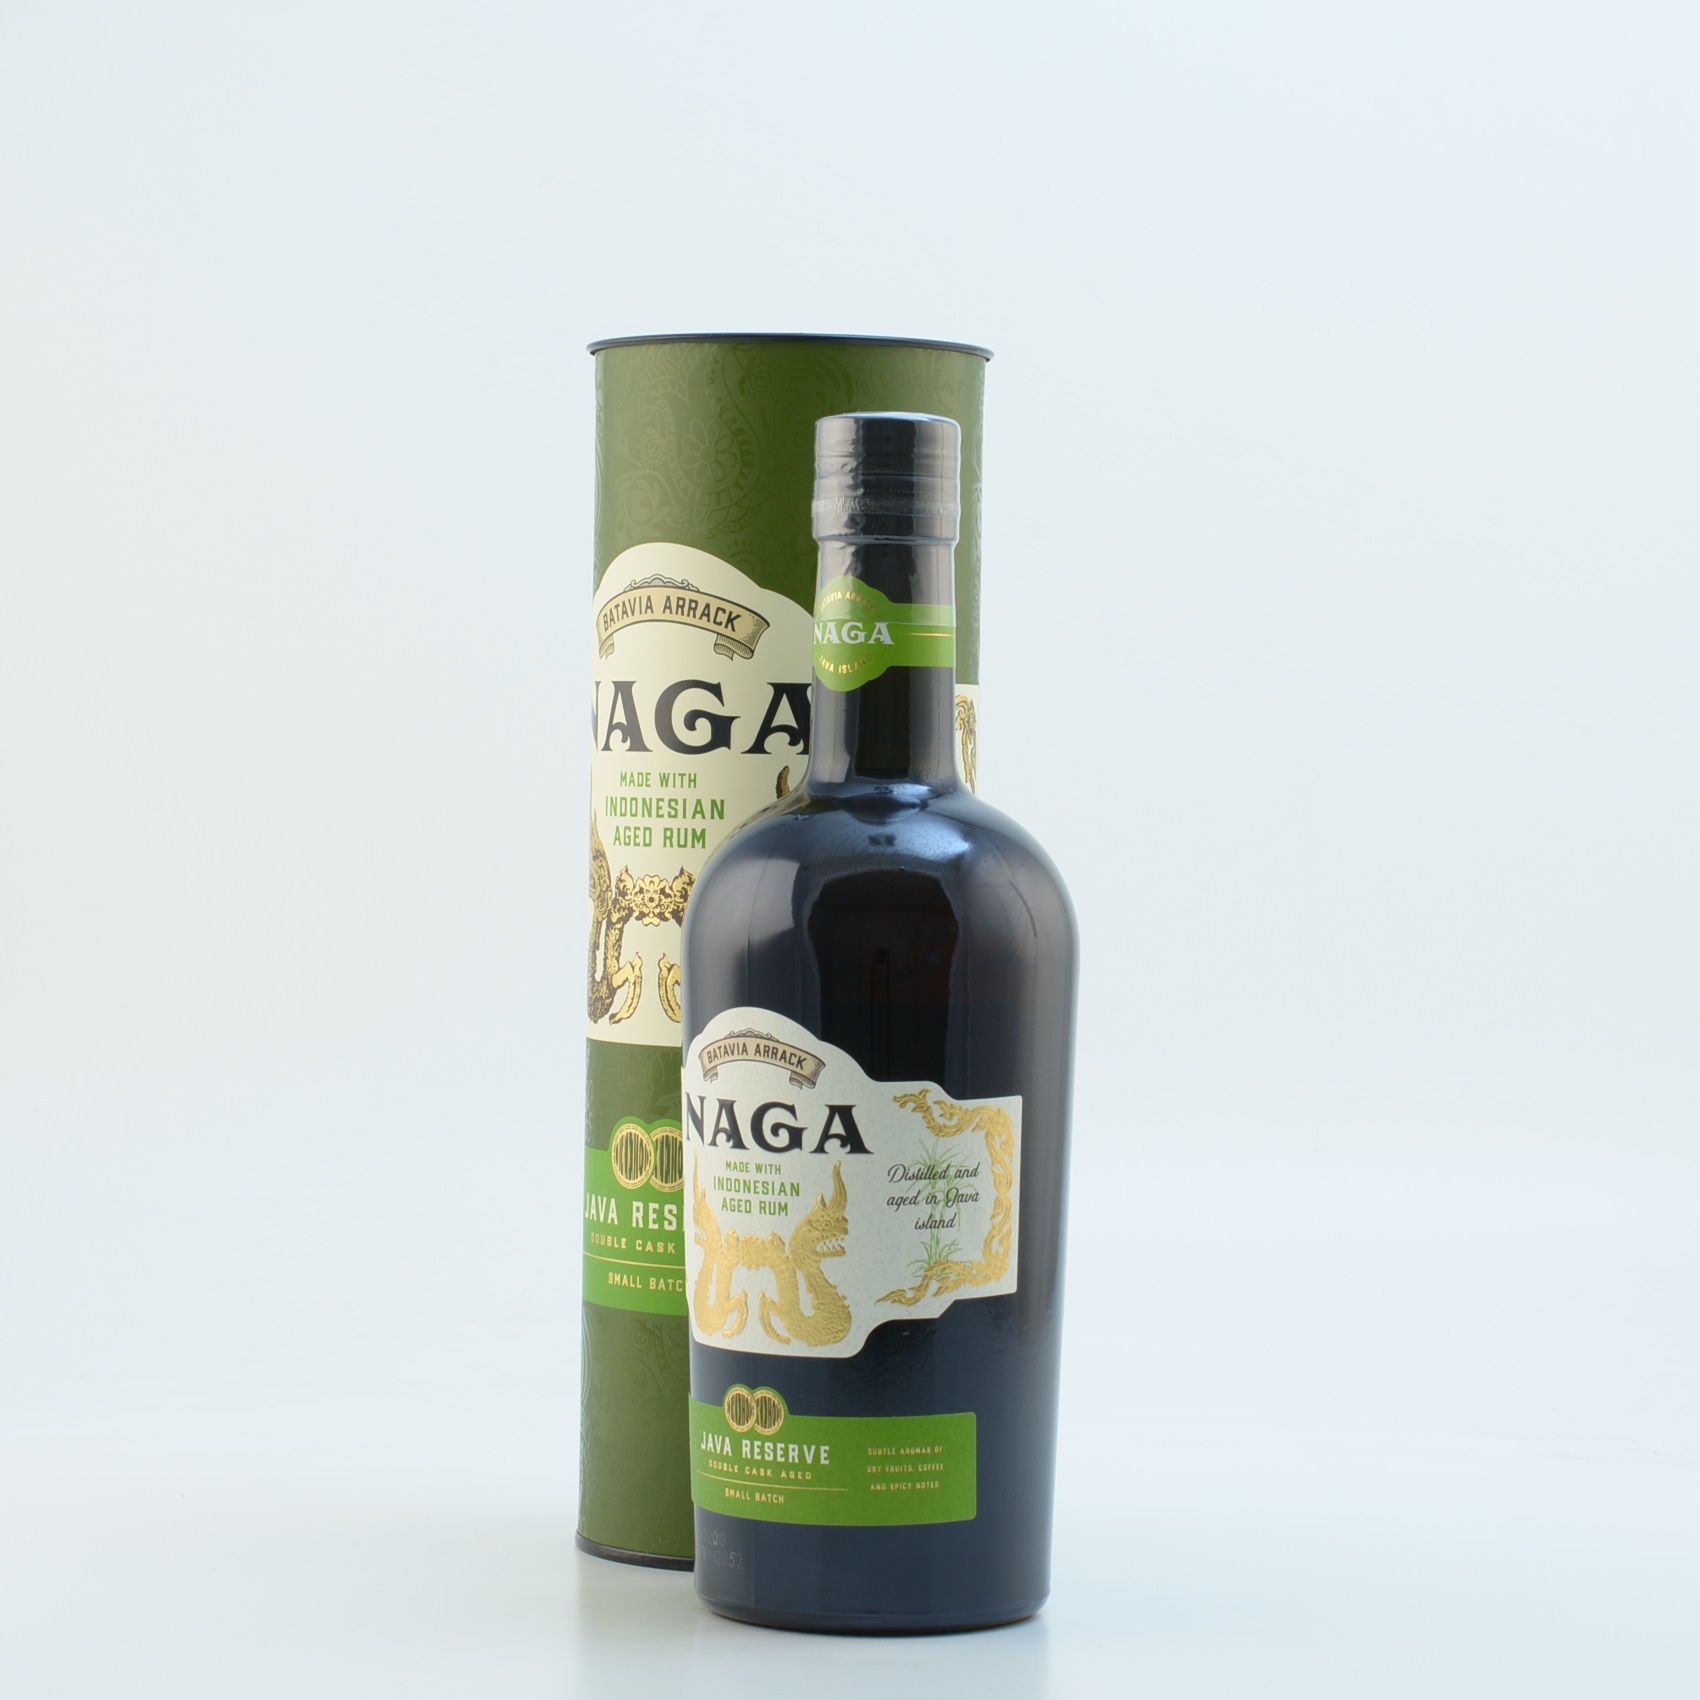 Naga Double Cask Aged Indonesian Rum 40% 0,7l